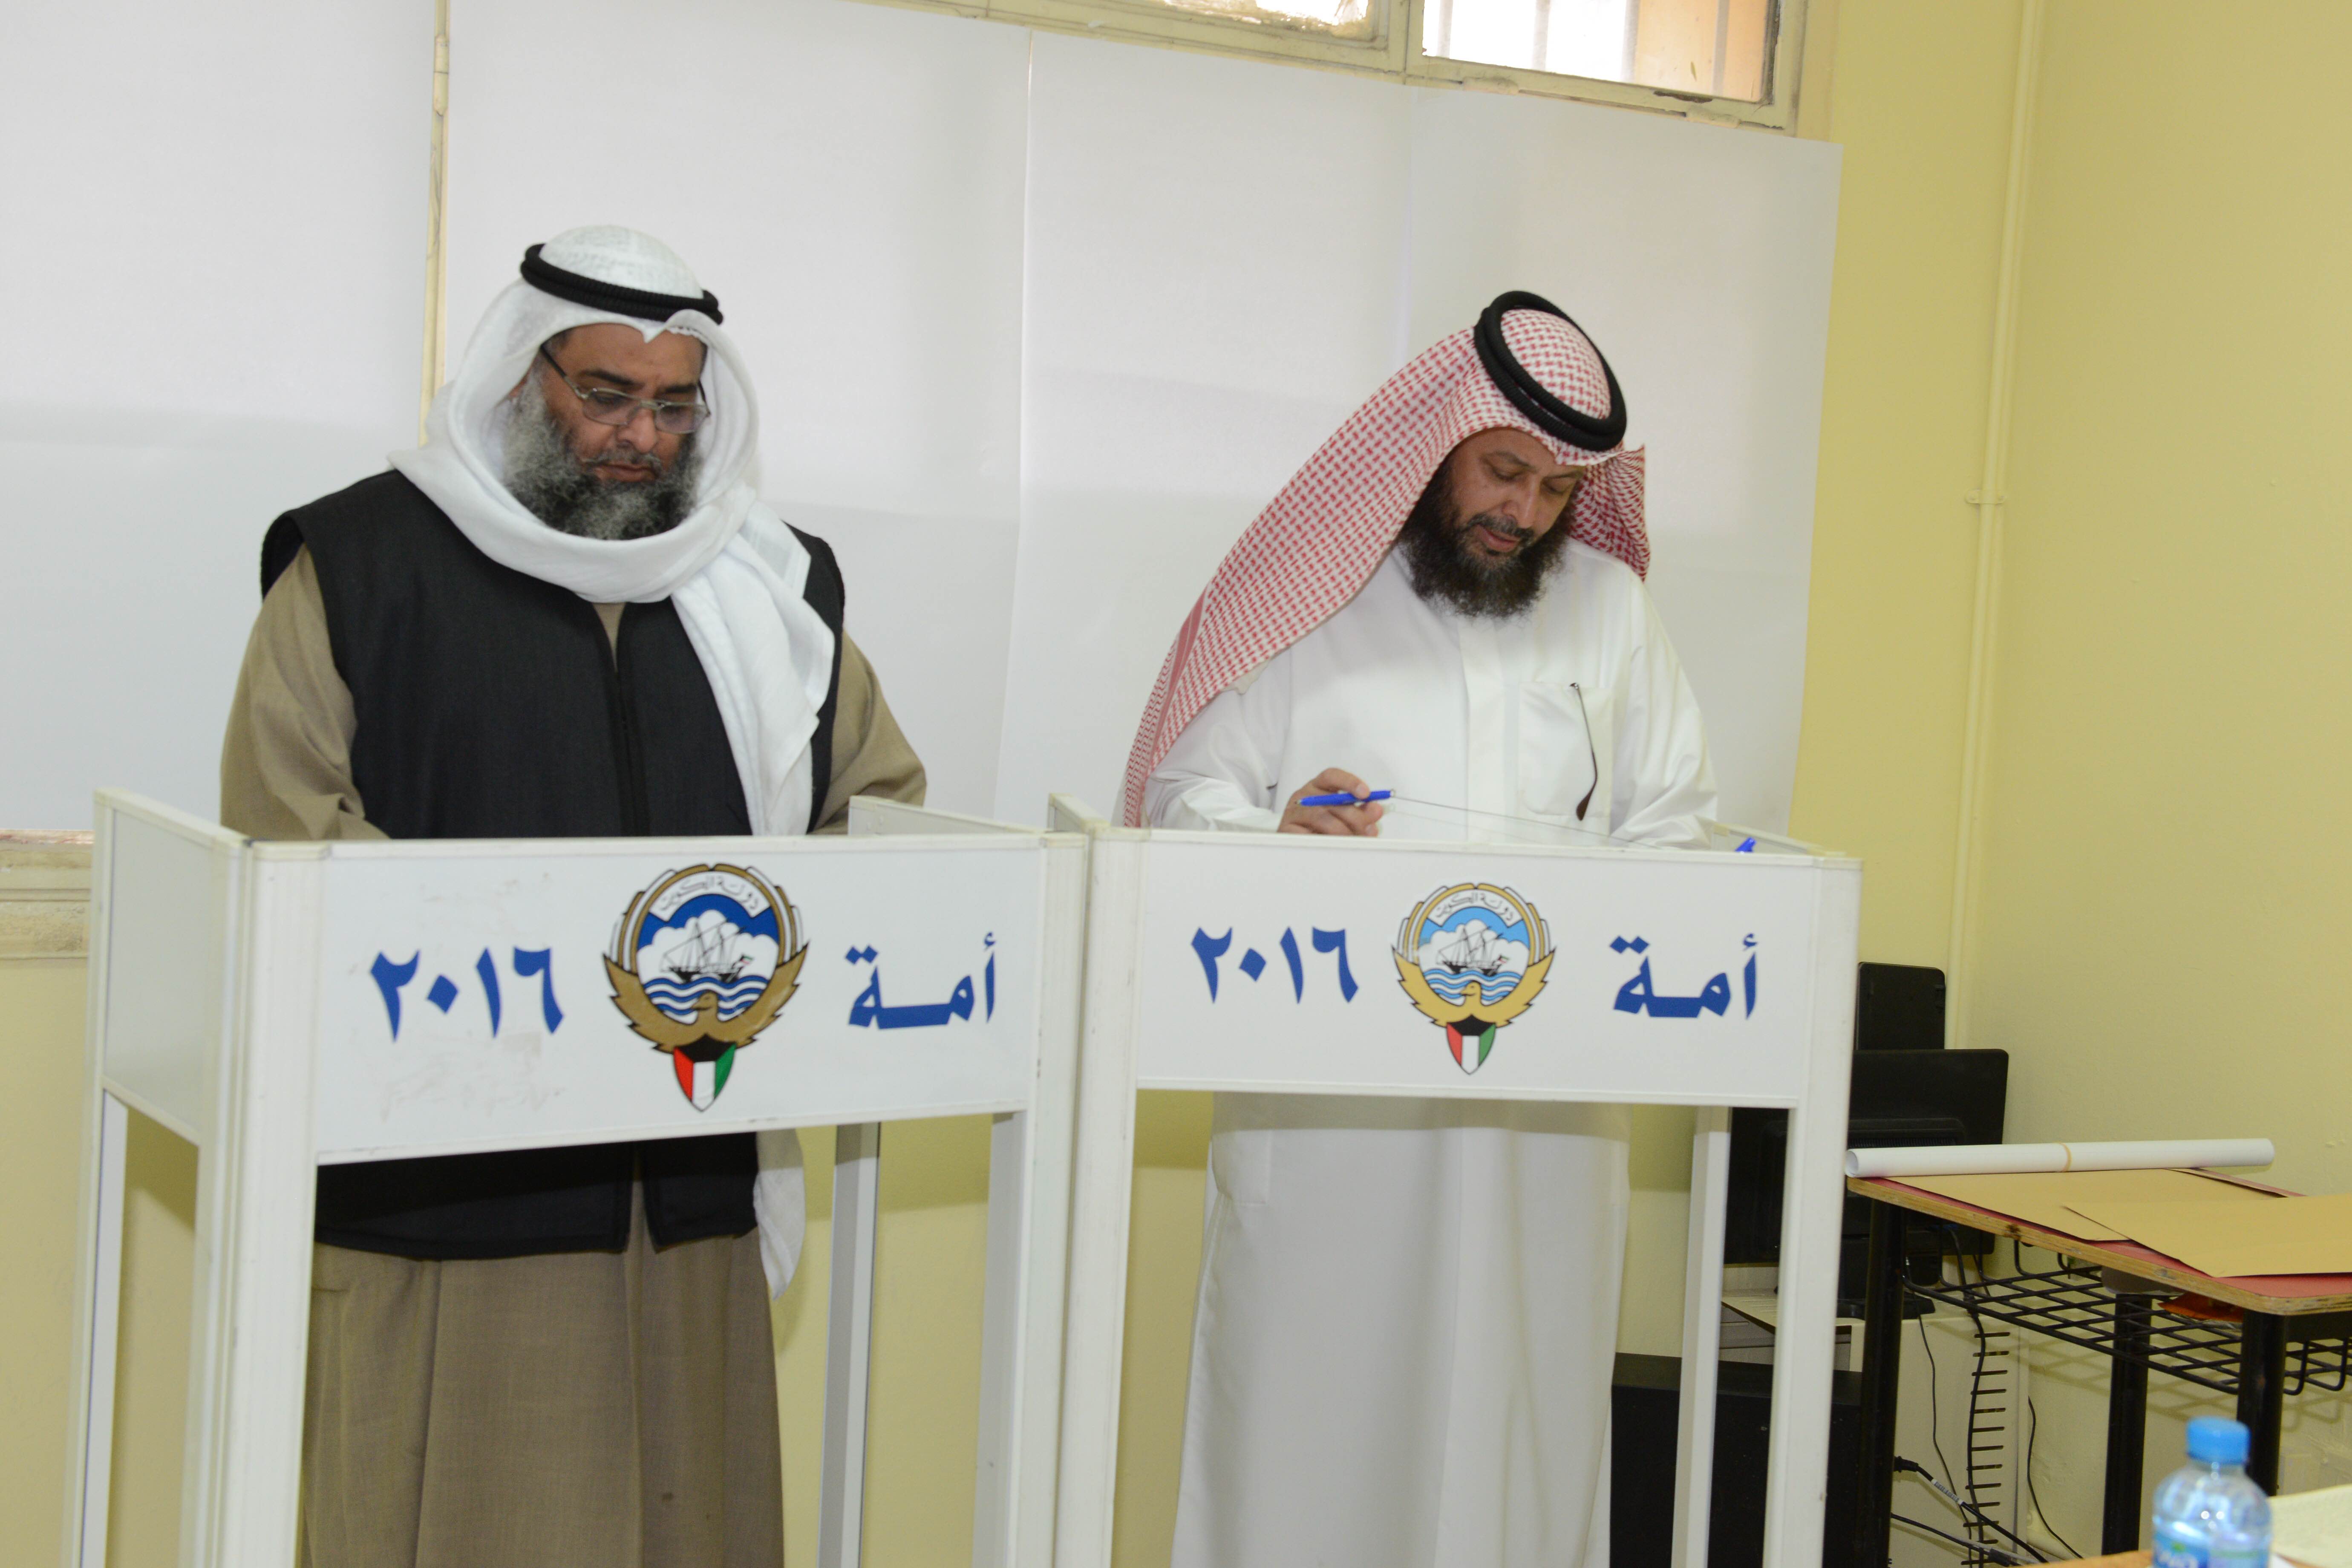 Kuwaiti voters at the beginning of polling